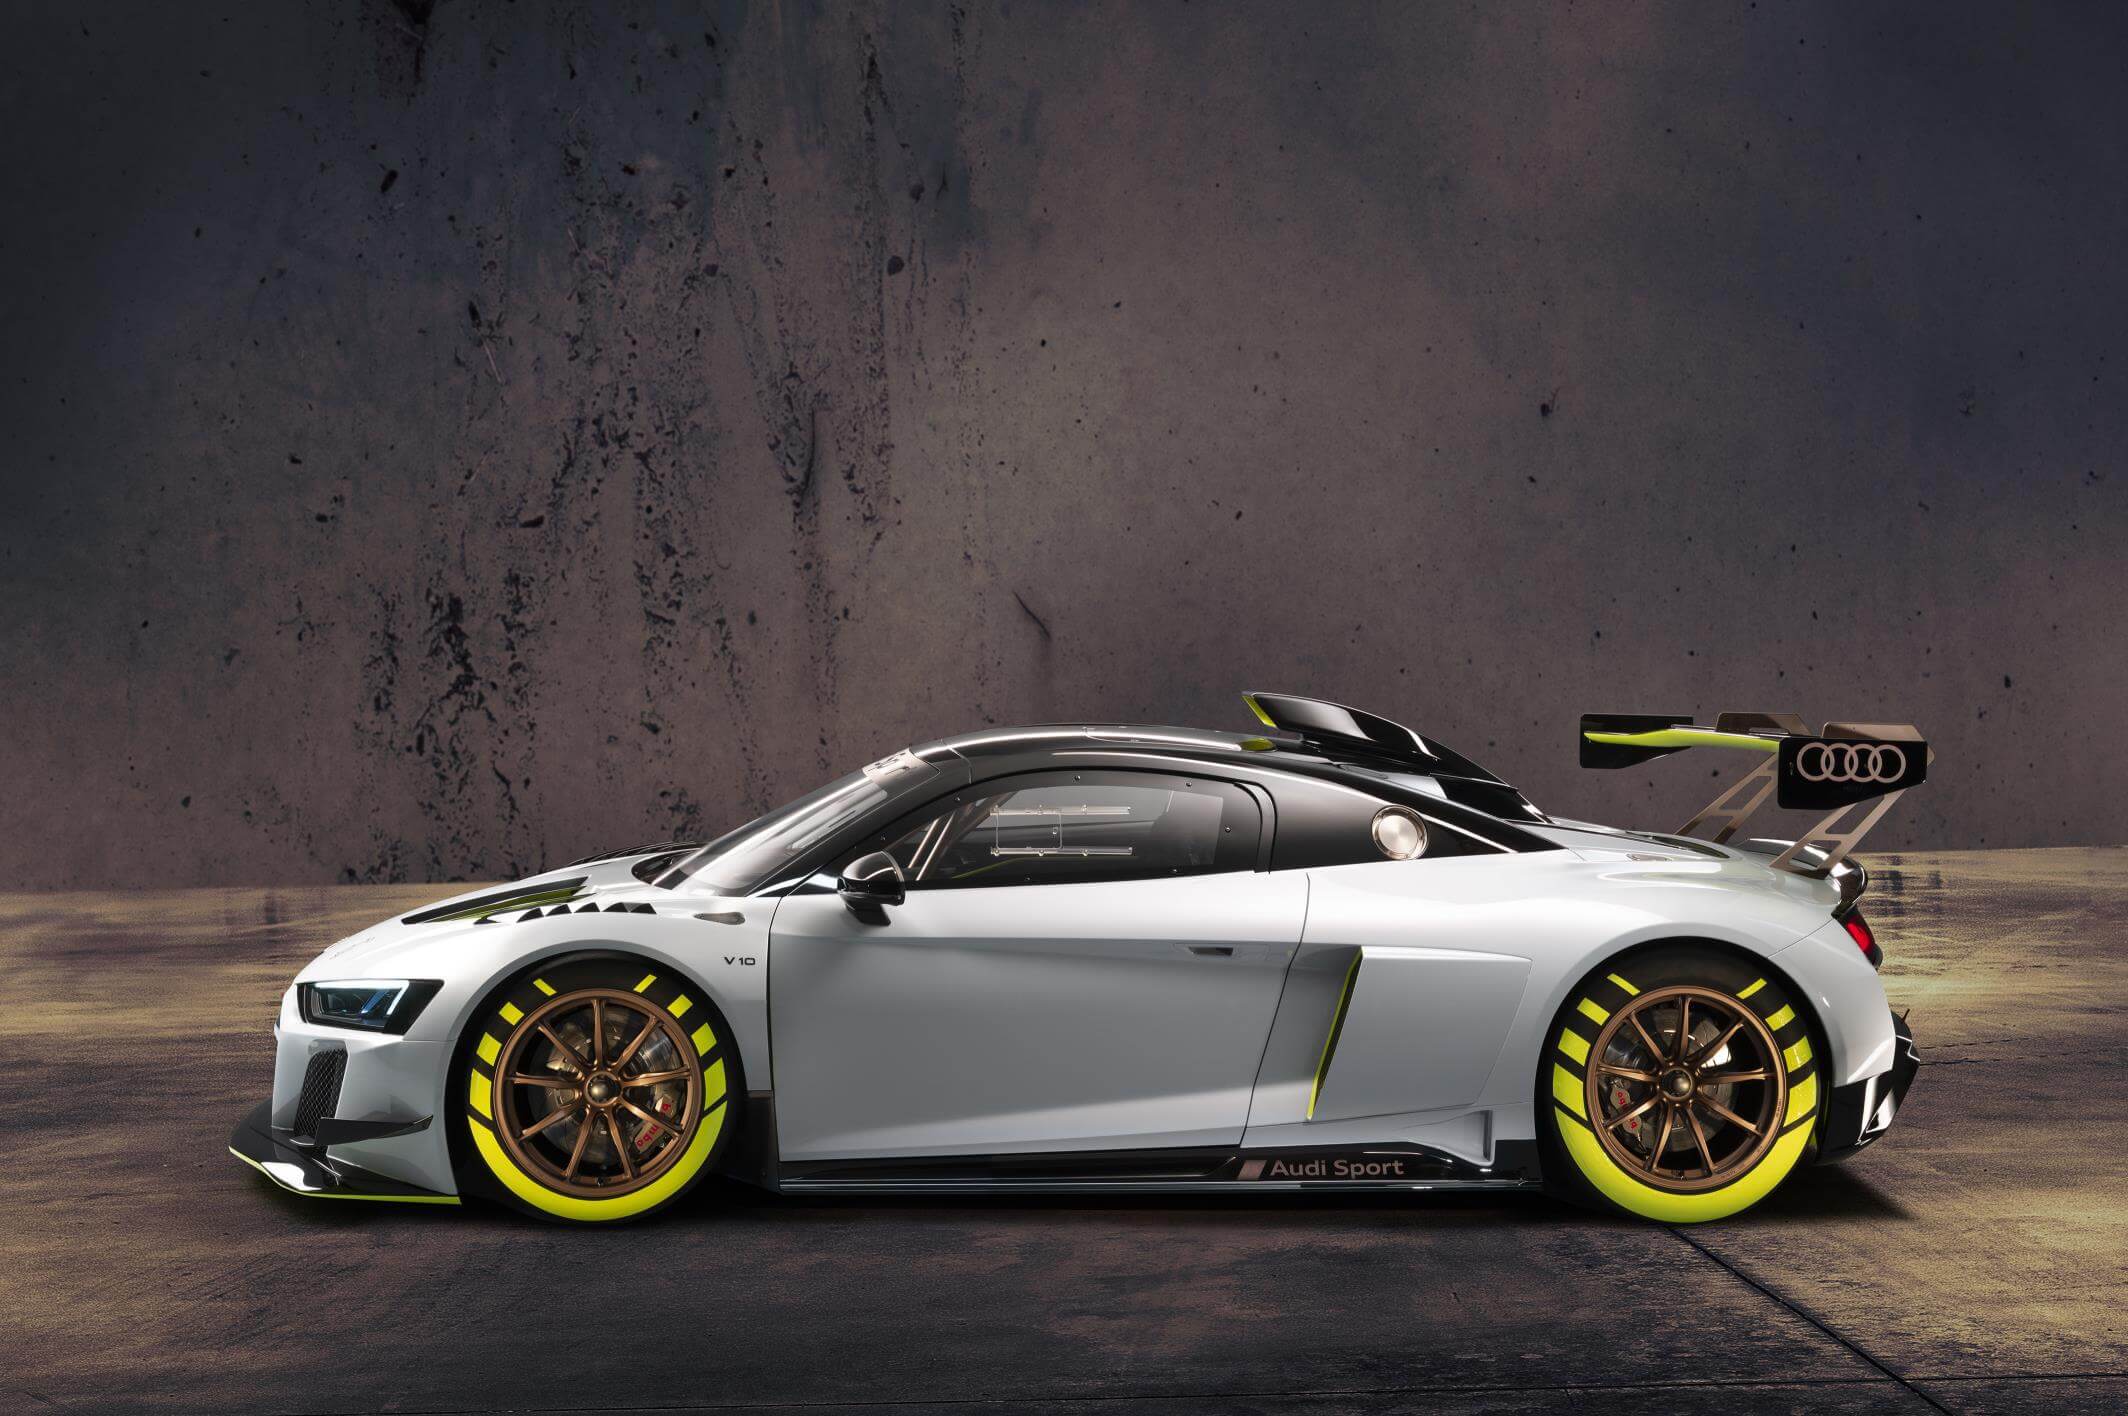 Audi R8 LMS GT2: lateral